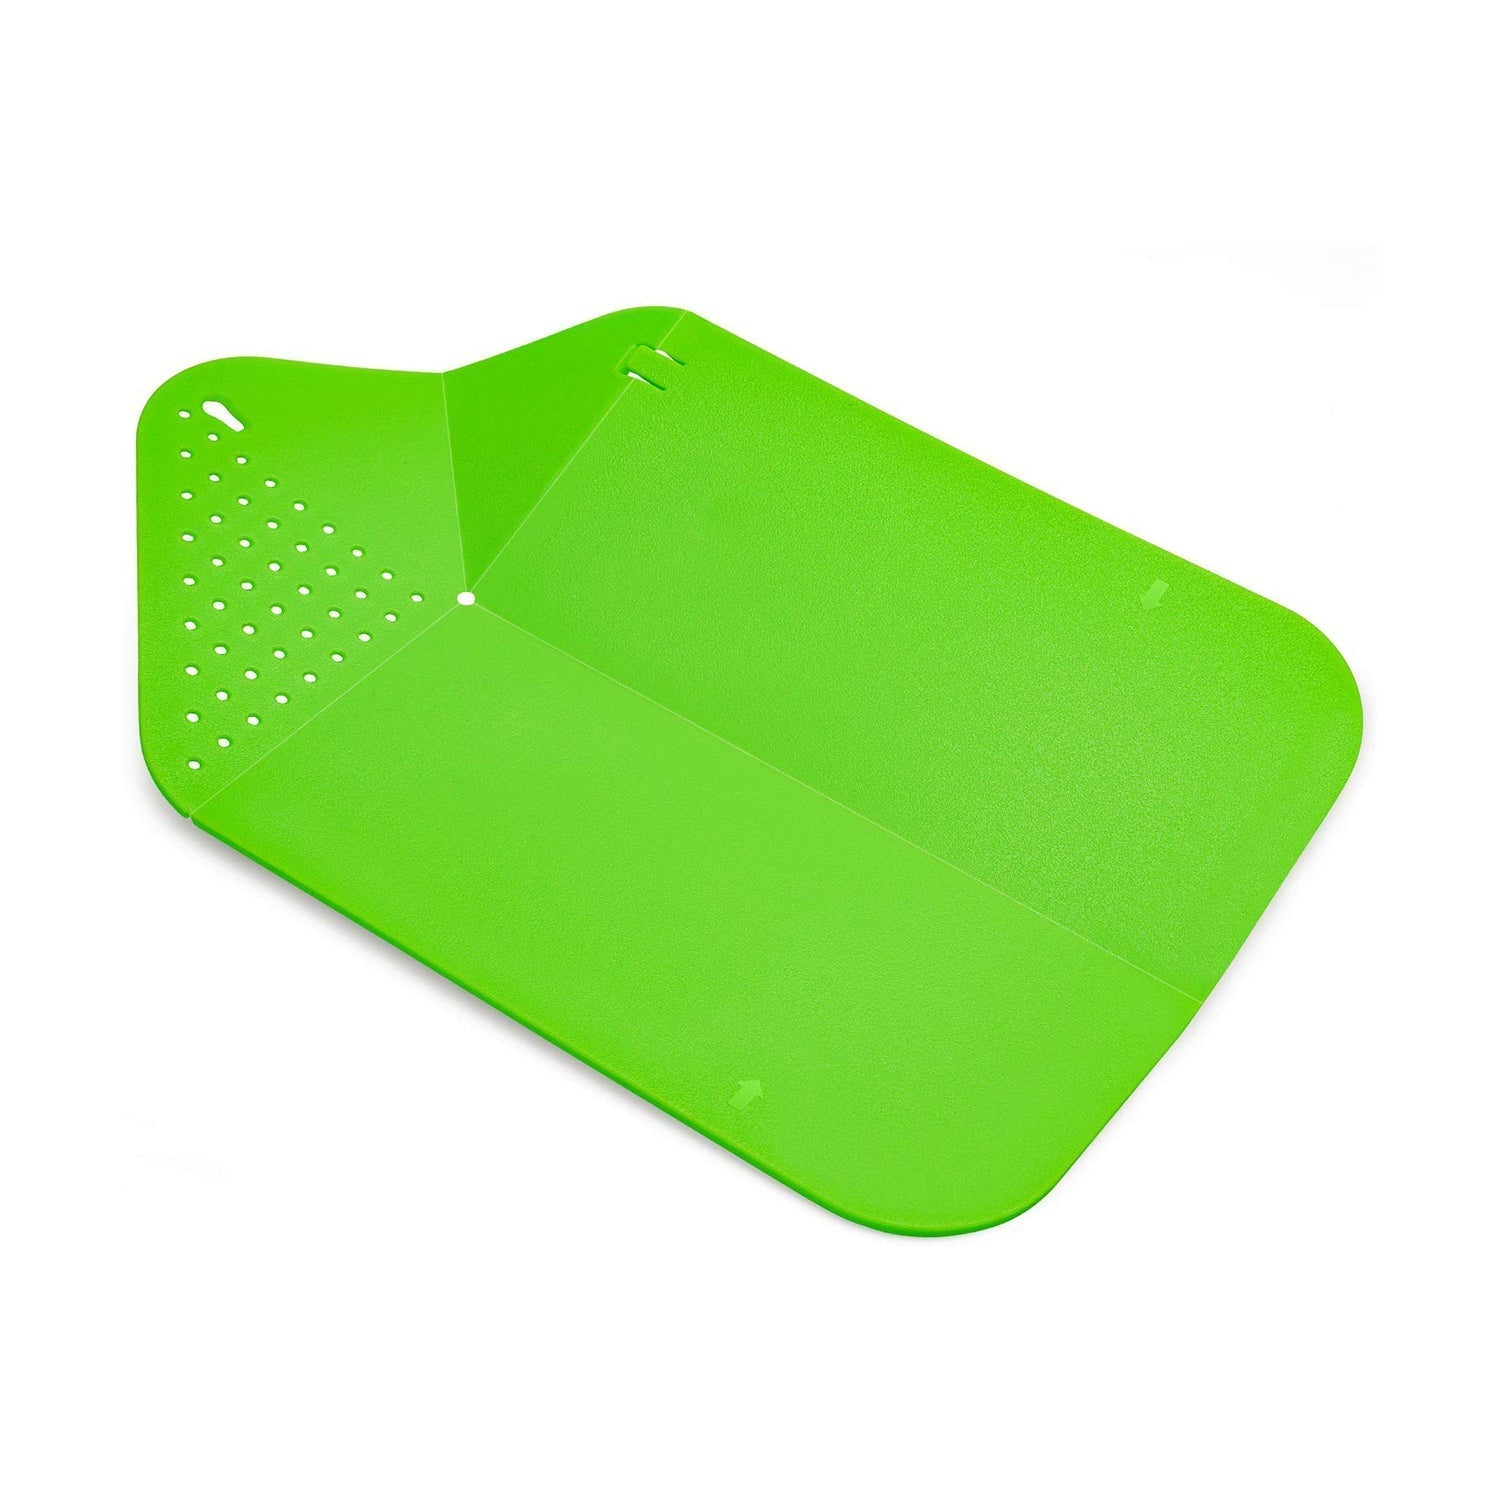 2675 Multi Chopping Board and stand for cutting and chopping of vegetables, fruits meats etc. including all kitchen purposes. DeoDap